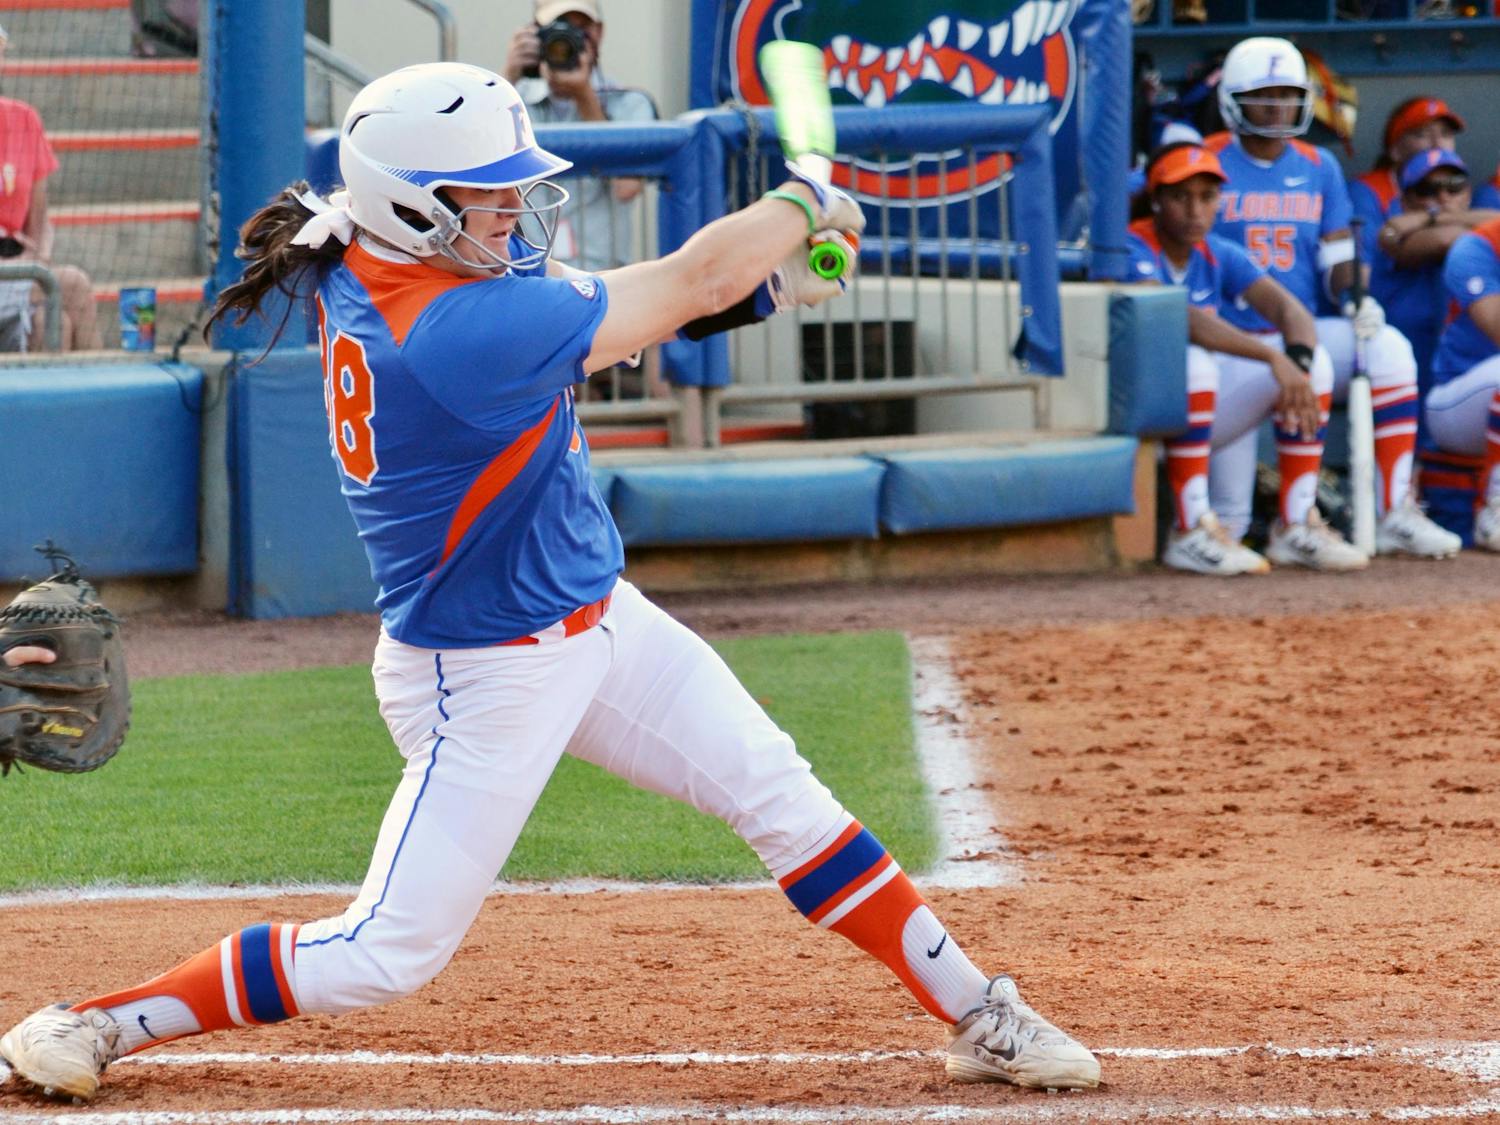 Bailey Castro bats during UF's win against UNF on April 1 at Katie Seashole Pressly Stadium.